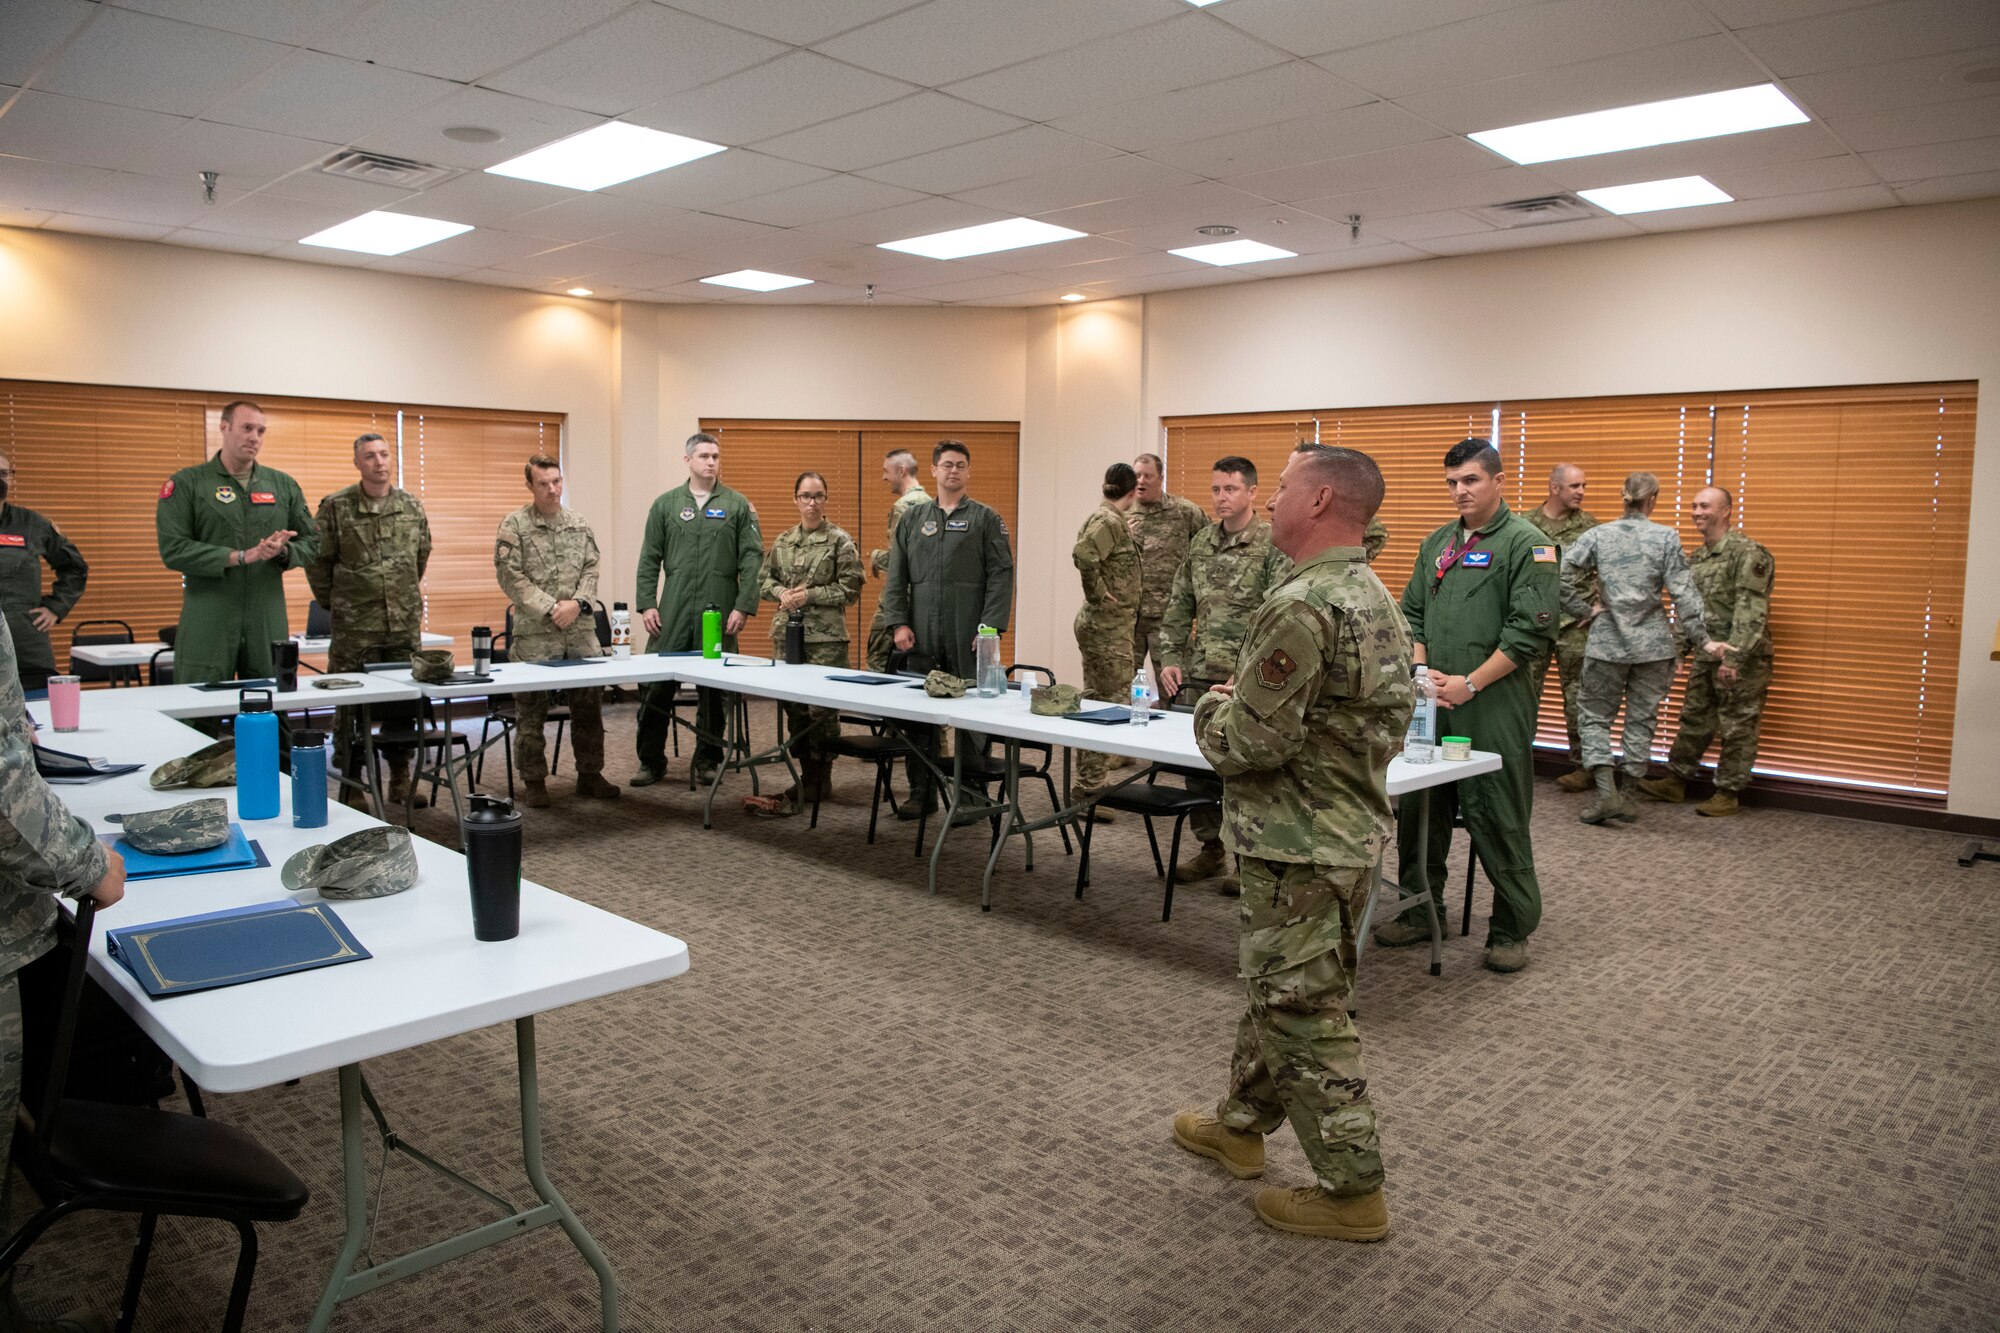 A First Sergeant talks to a group of noncommissioned officers.